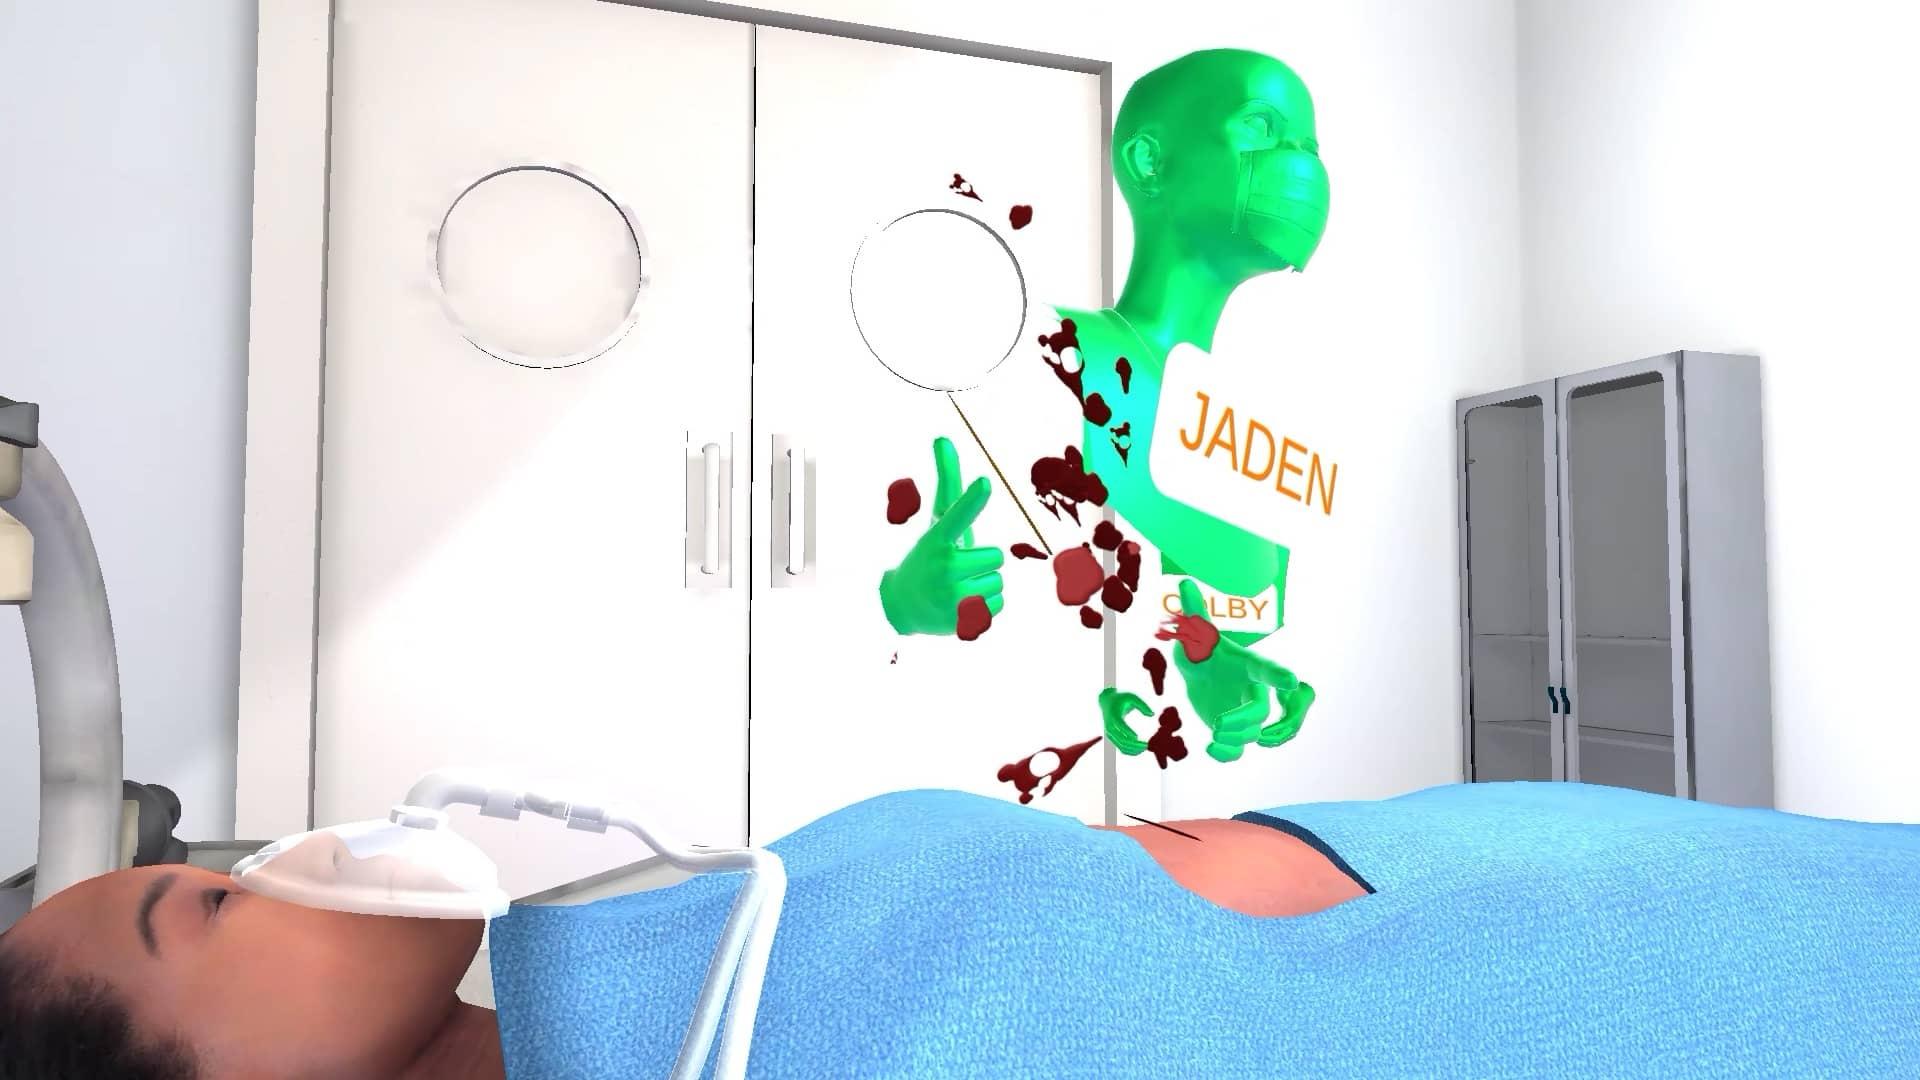 A simulated virtual operating room, all white with metal cabinets and instruments, close up on patient on operating table and avatar of student (green) using a virtual scalpel to make an incision in the patient. Virtual blood is spurting from the incision.